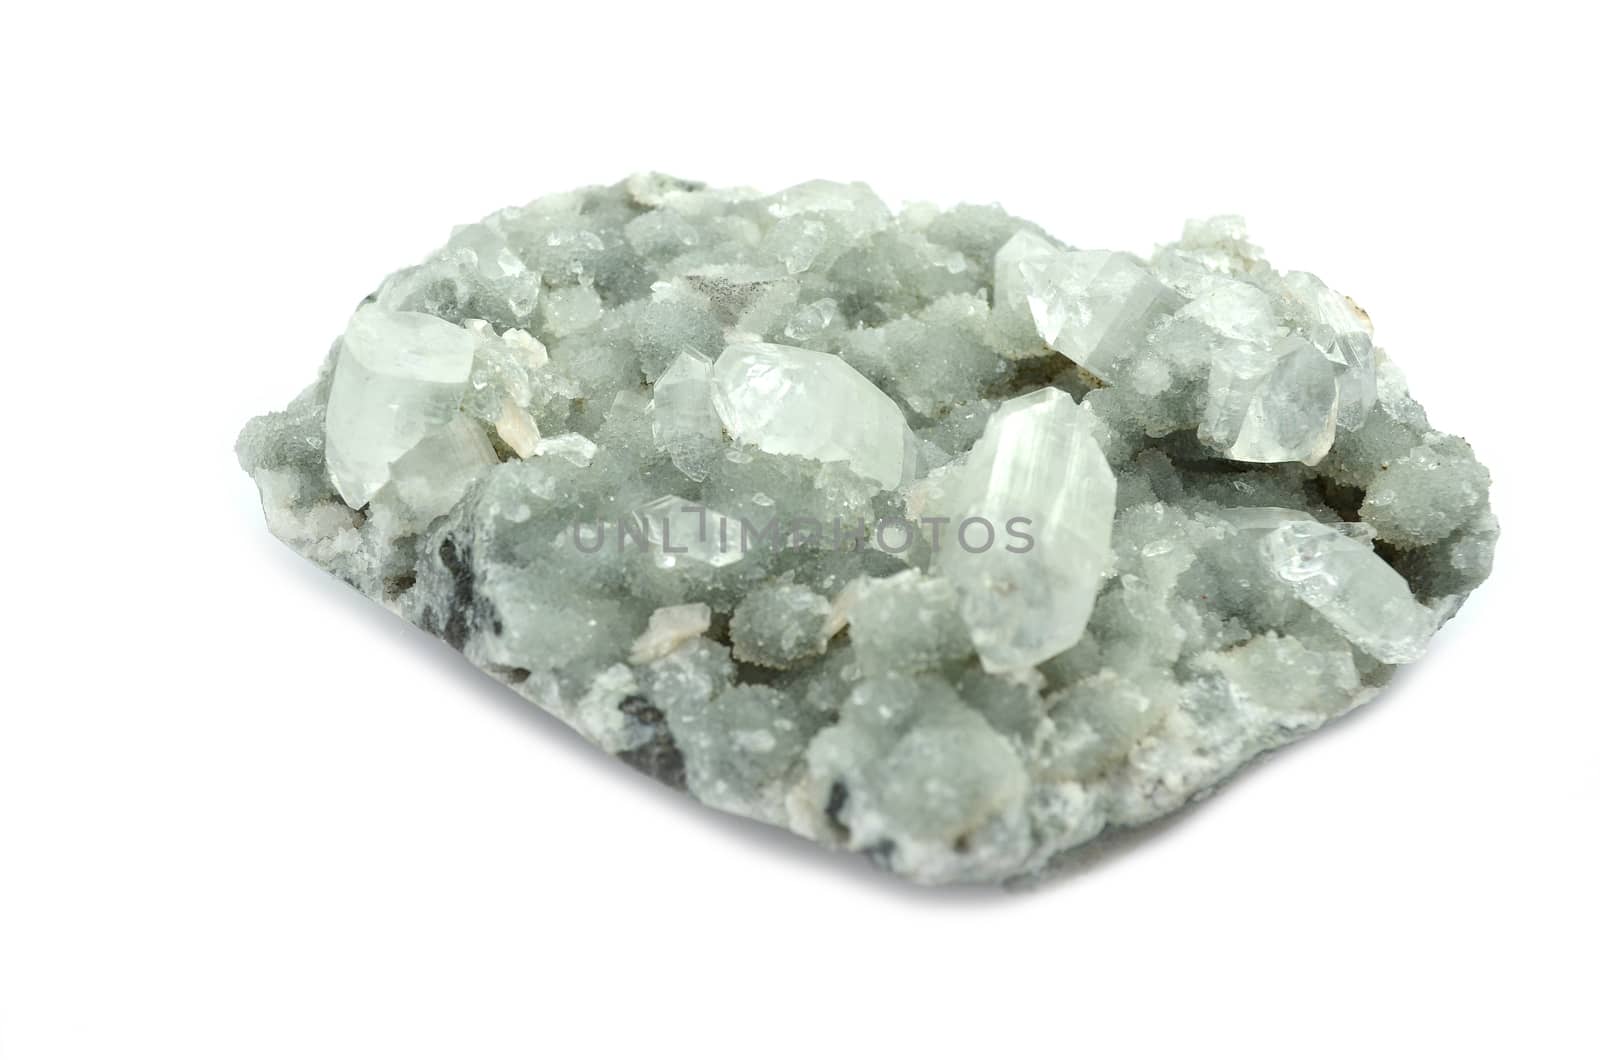 Sample of green Apophyllite a beautiful nature specimen isolated on white background